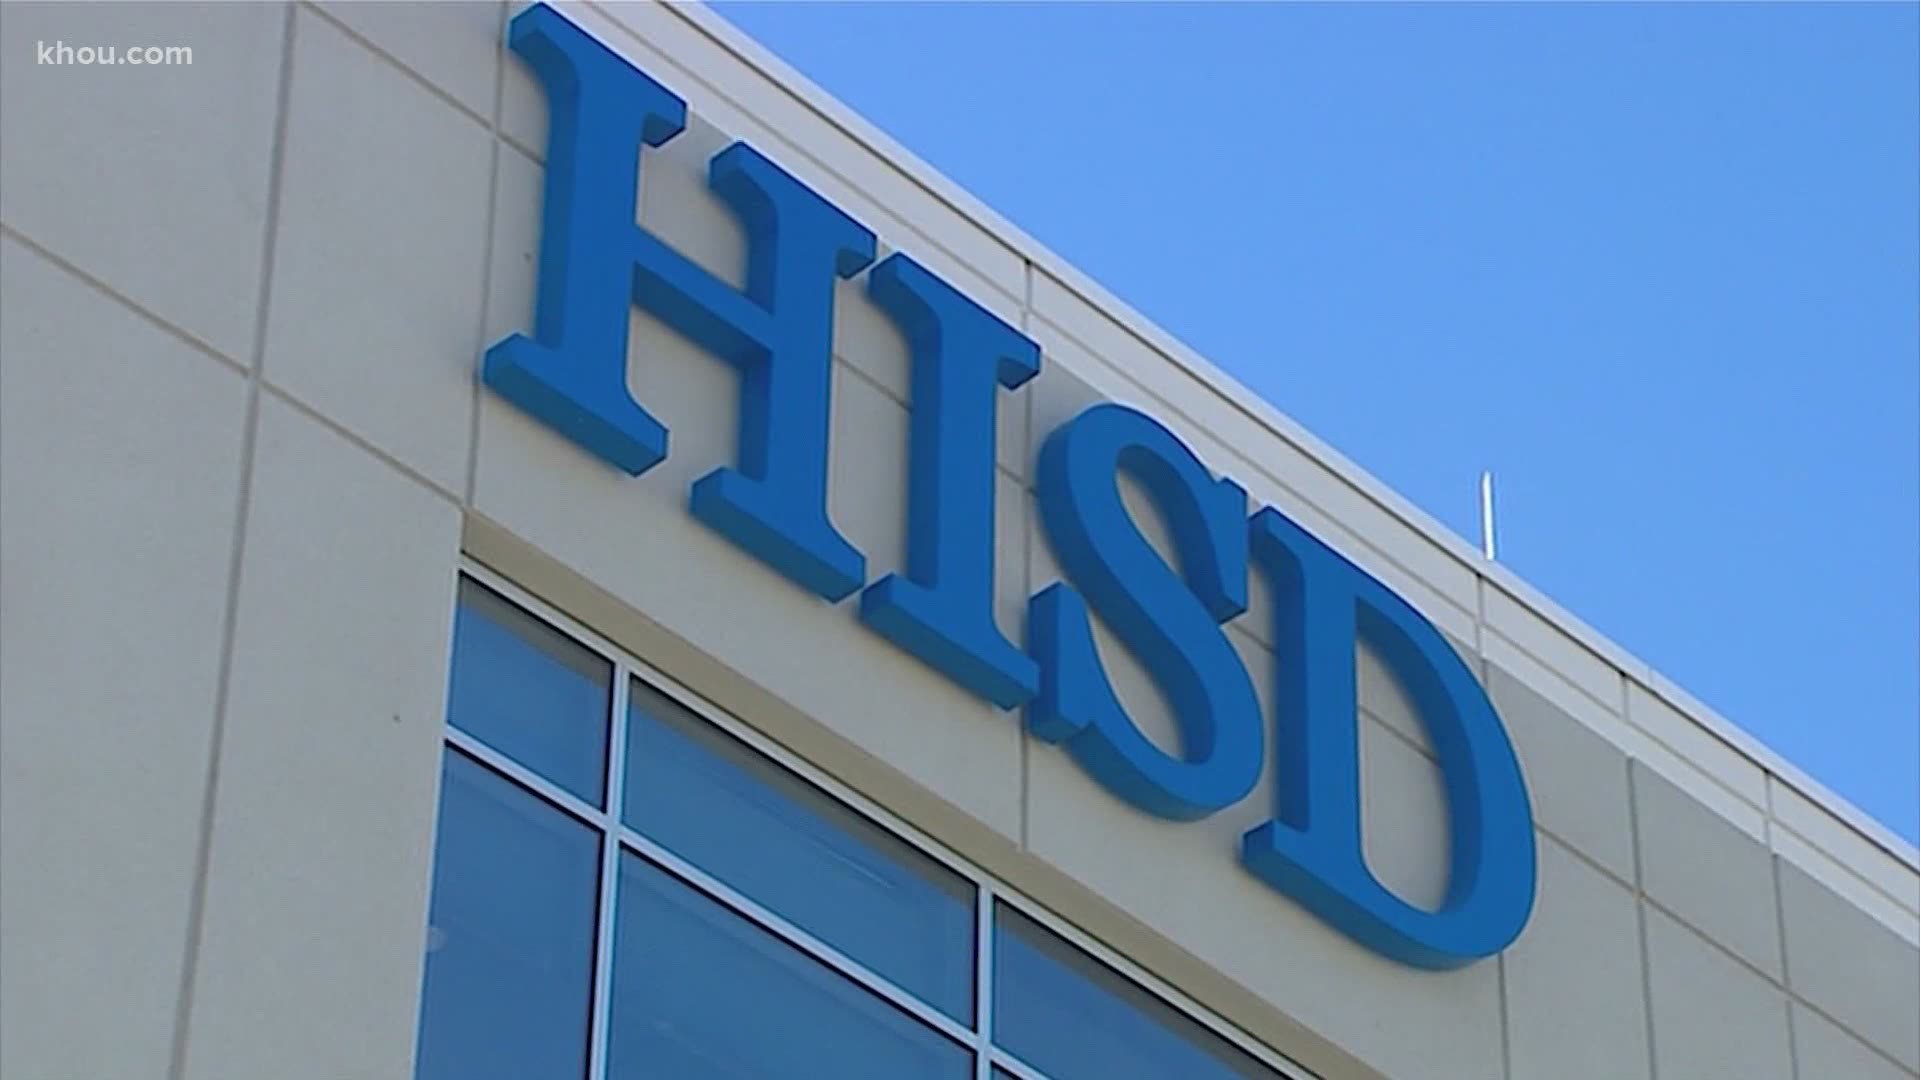 The appeals court upheld a temporary injunction that stops Texas from ousting Houston ISD's school board. But the legal battle is not over.